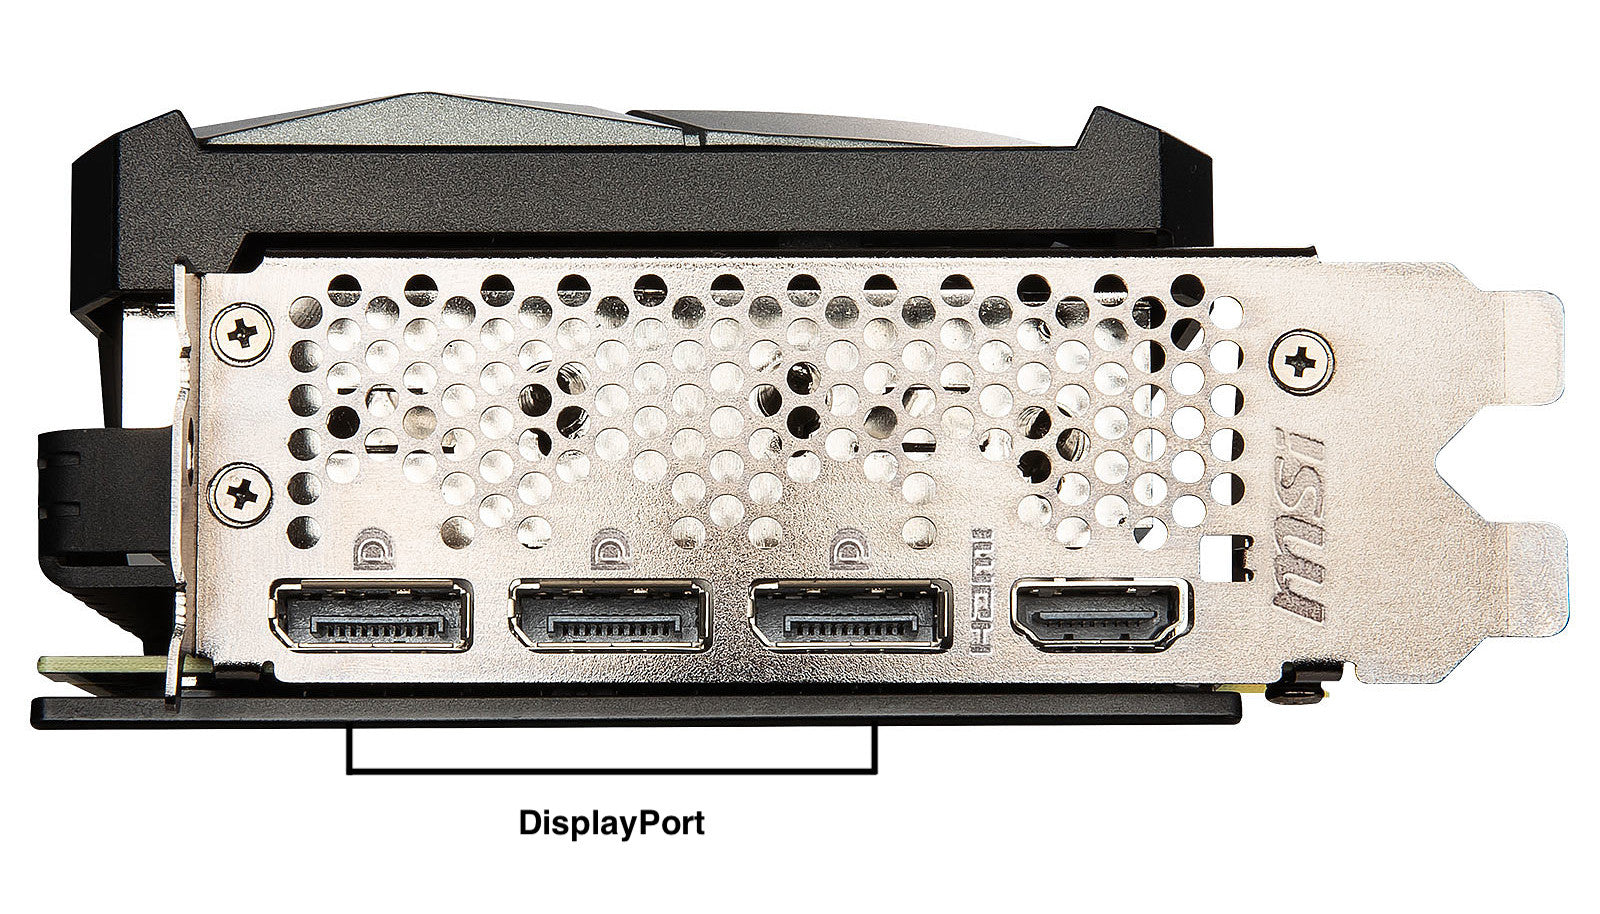 Which Is Better: DisplayPort or HDMI?